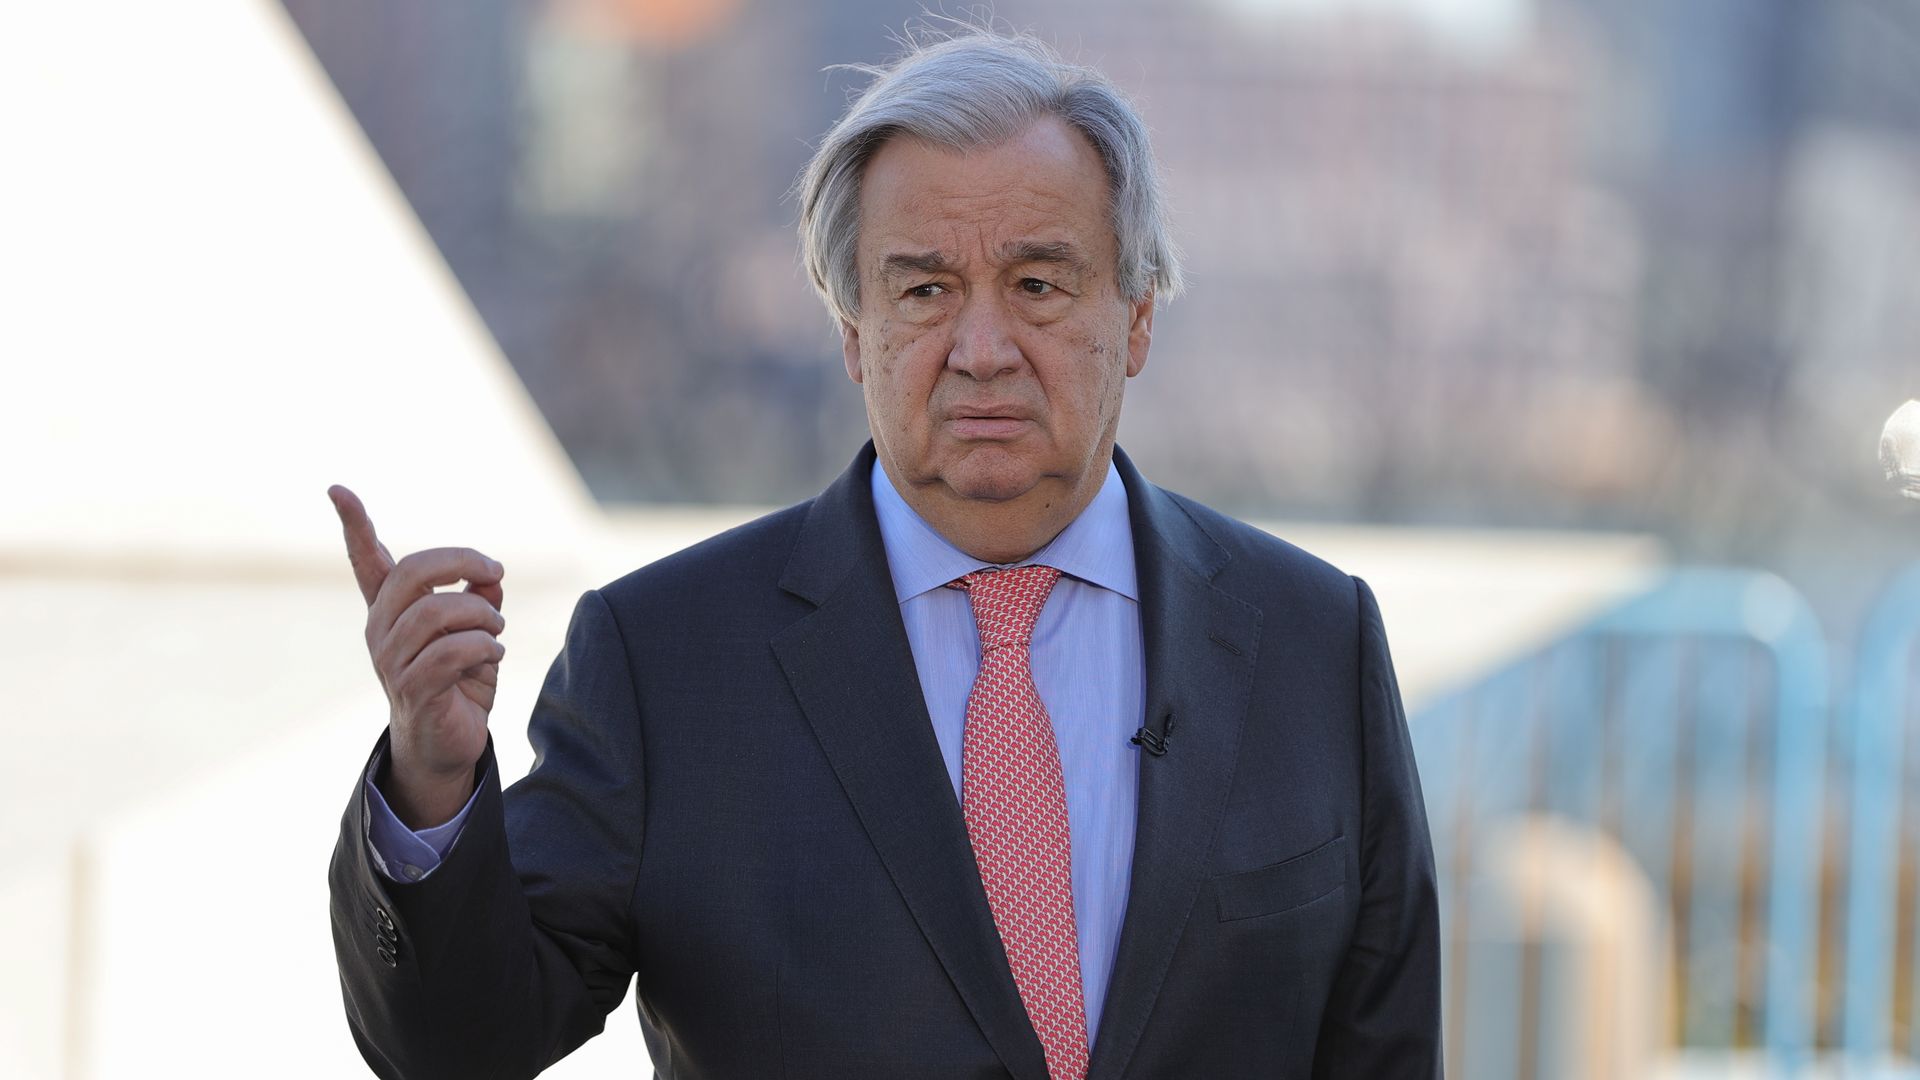 Secretary General Antonio Guterres visits the Ark of Return, a memorial to slavery, at the UN Headquarters in New York City